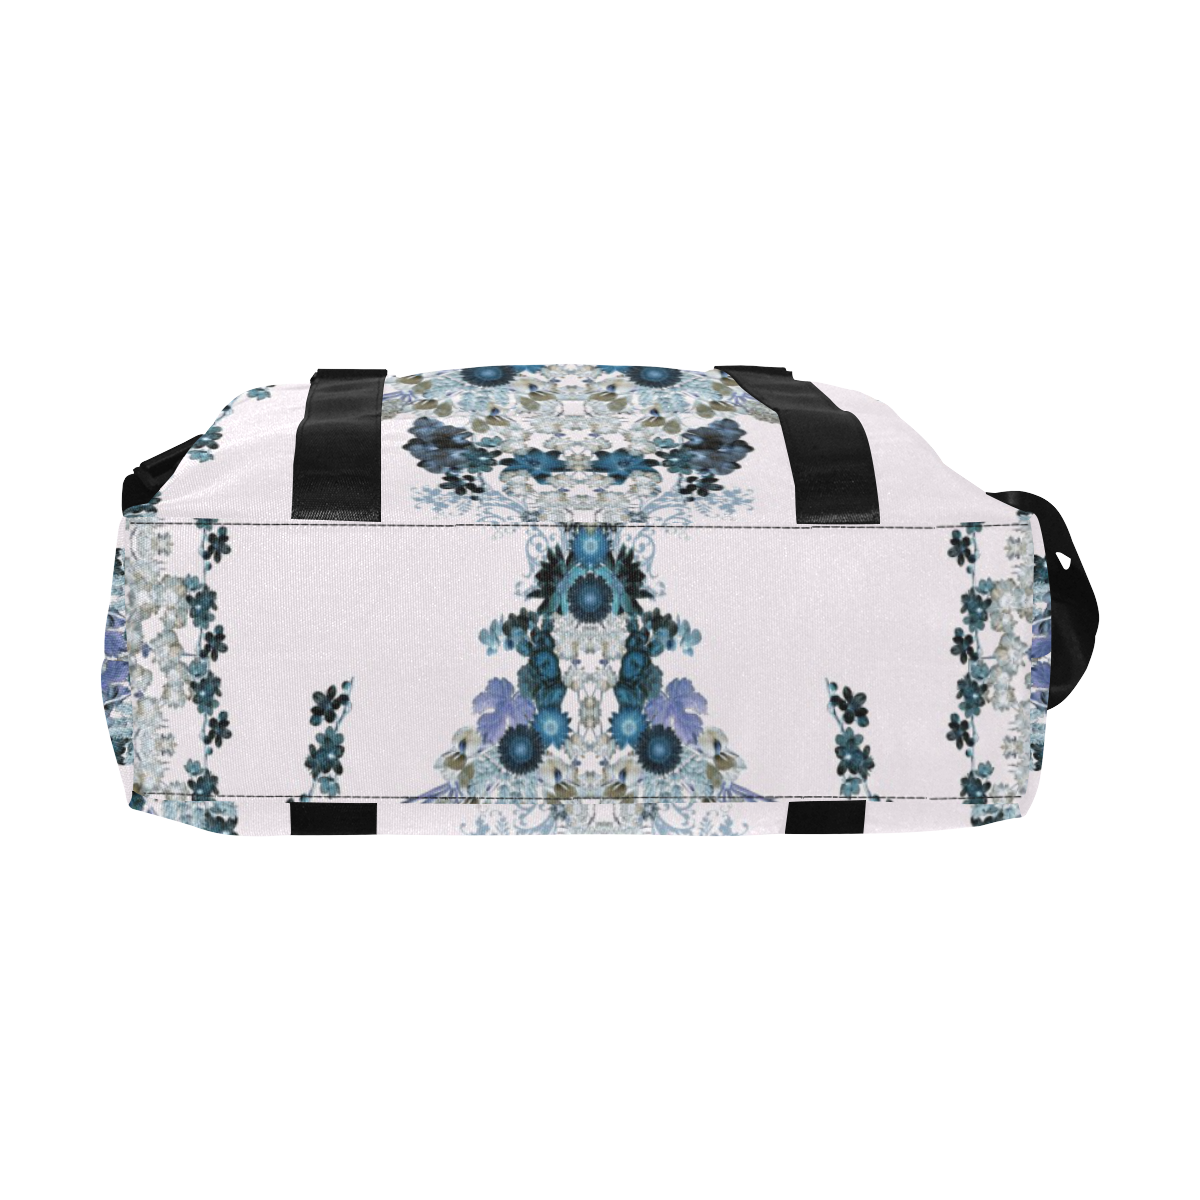 floral-black and peach Large Capacity Duffle Bag (Model 1715)